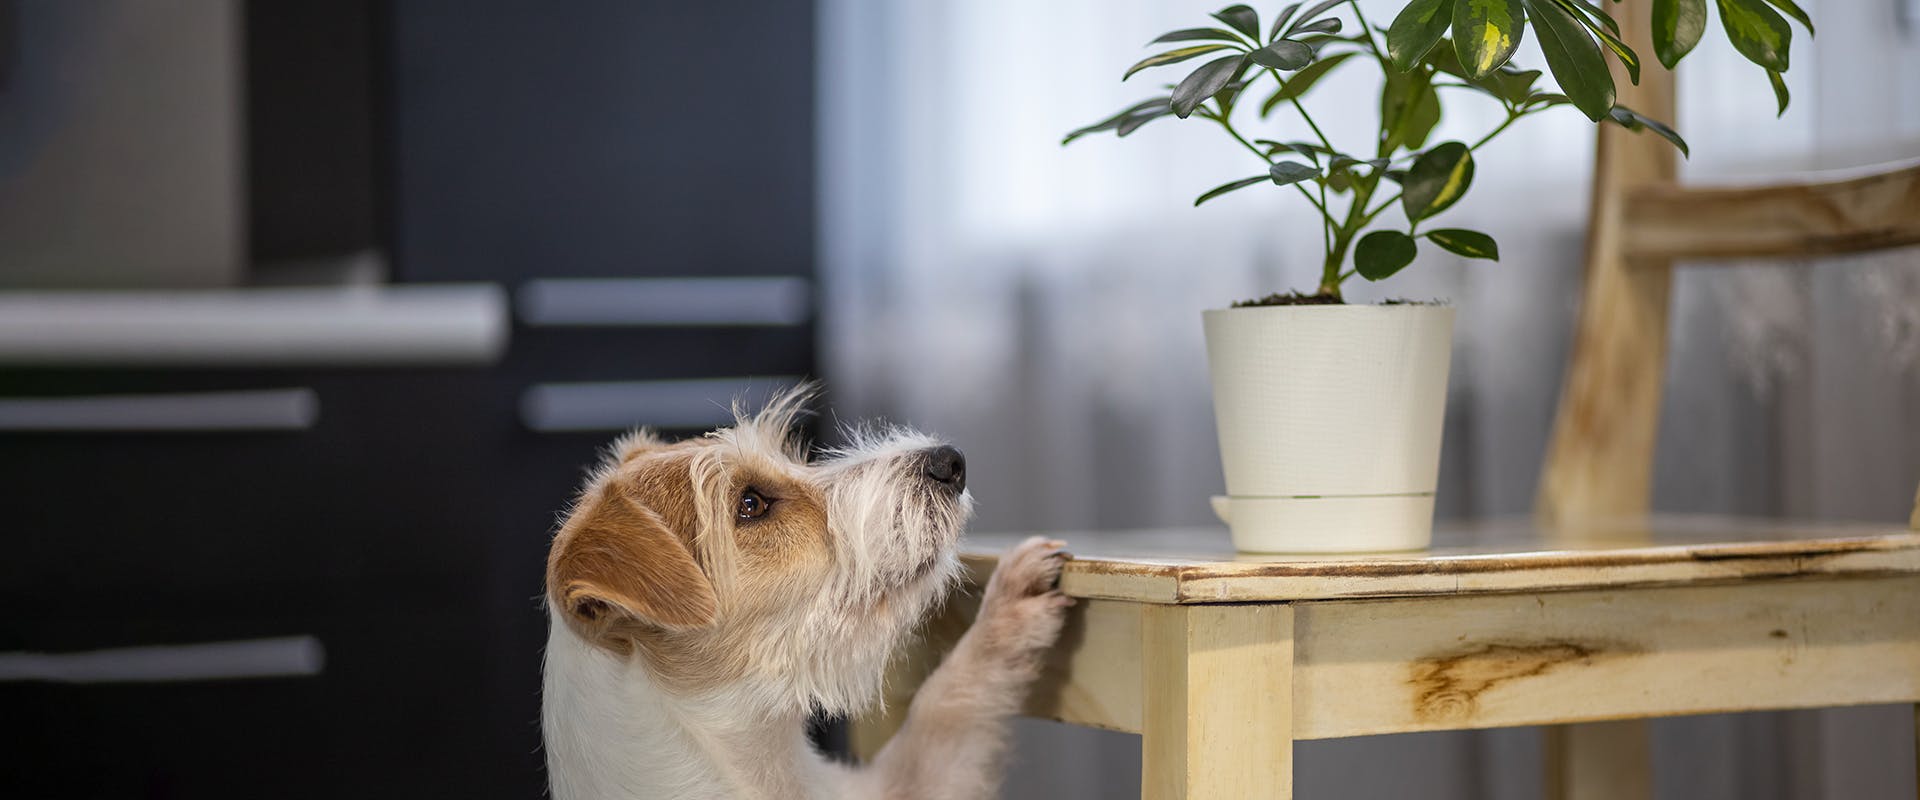 A dog standing on its back legs, its paws resting on a chair, looking up at a potted umbrella tree plant